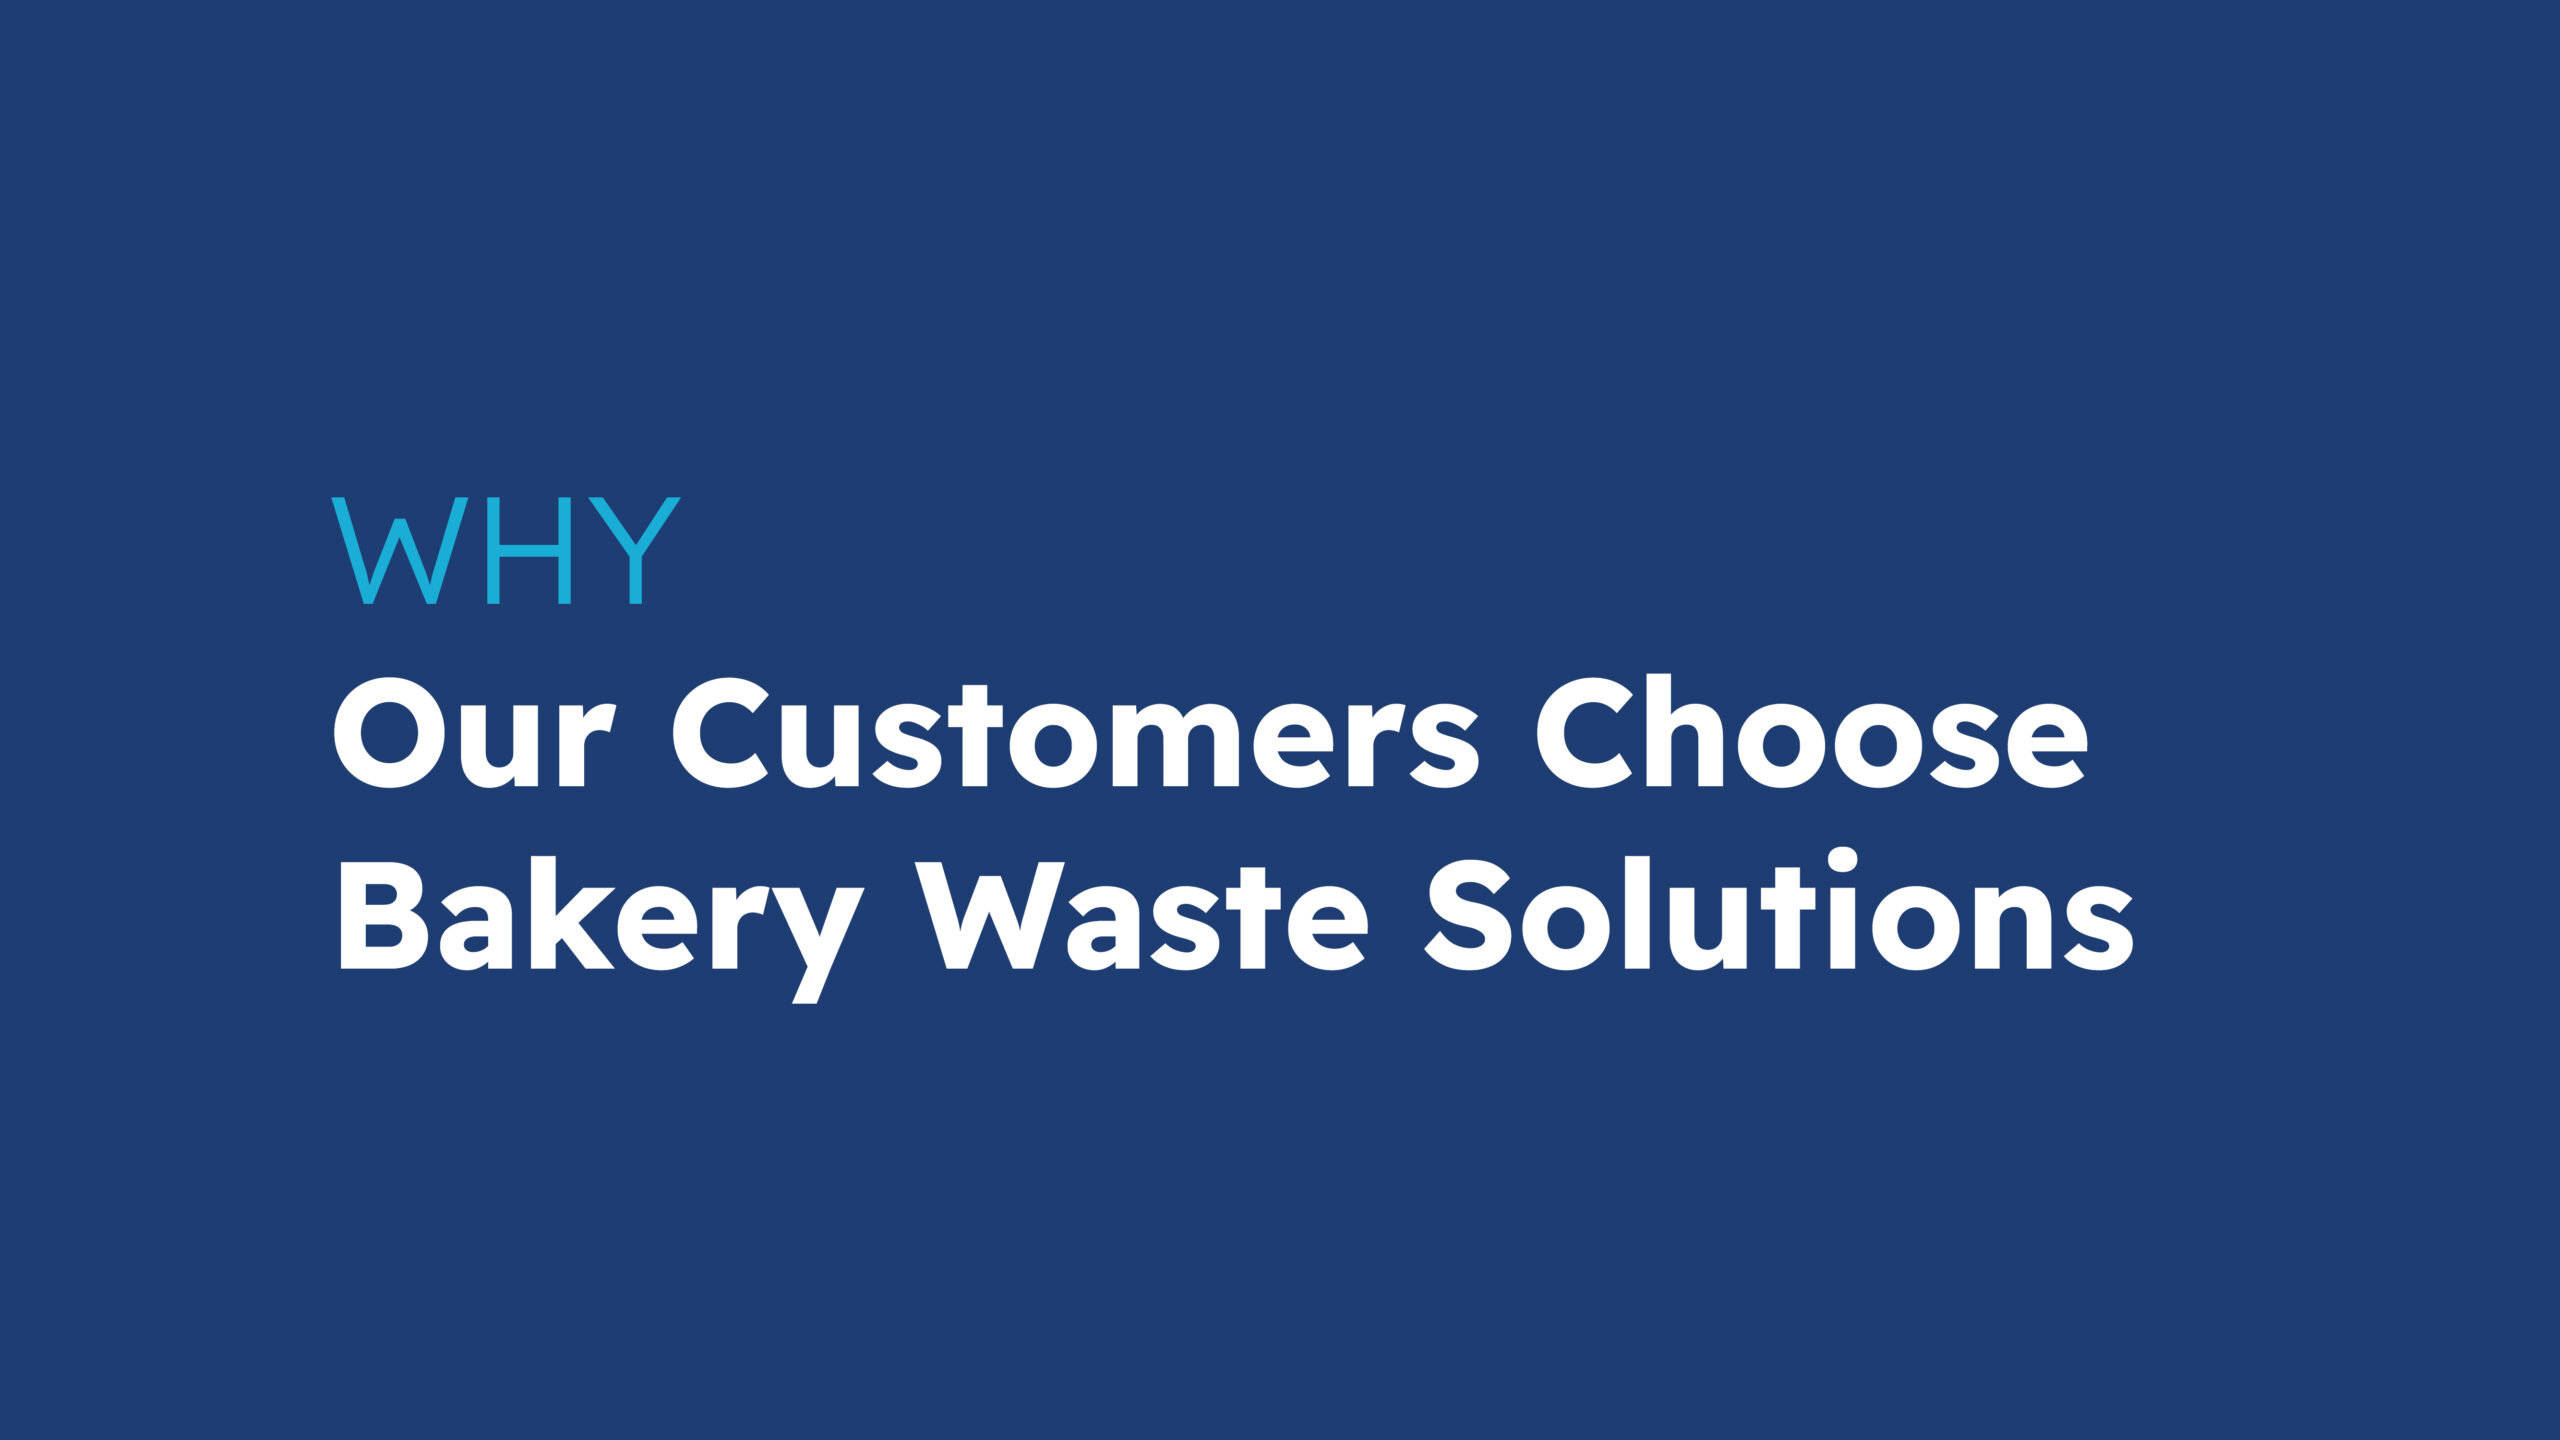 Why Our Customers Choose Bakery Waste Solutions